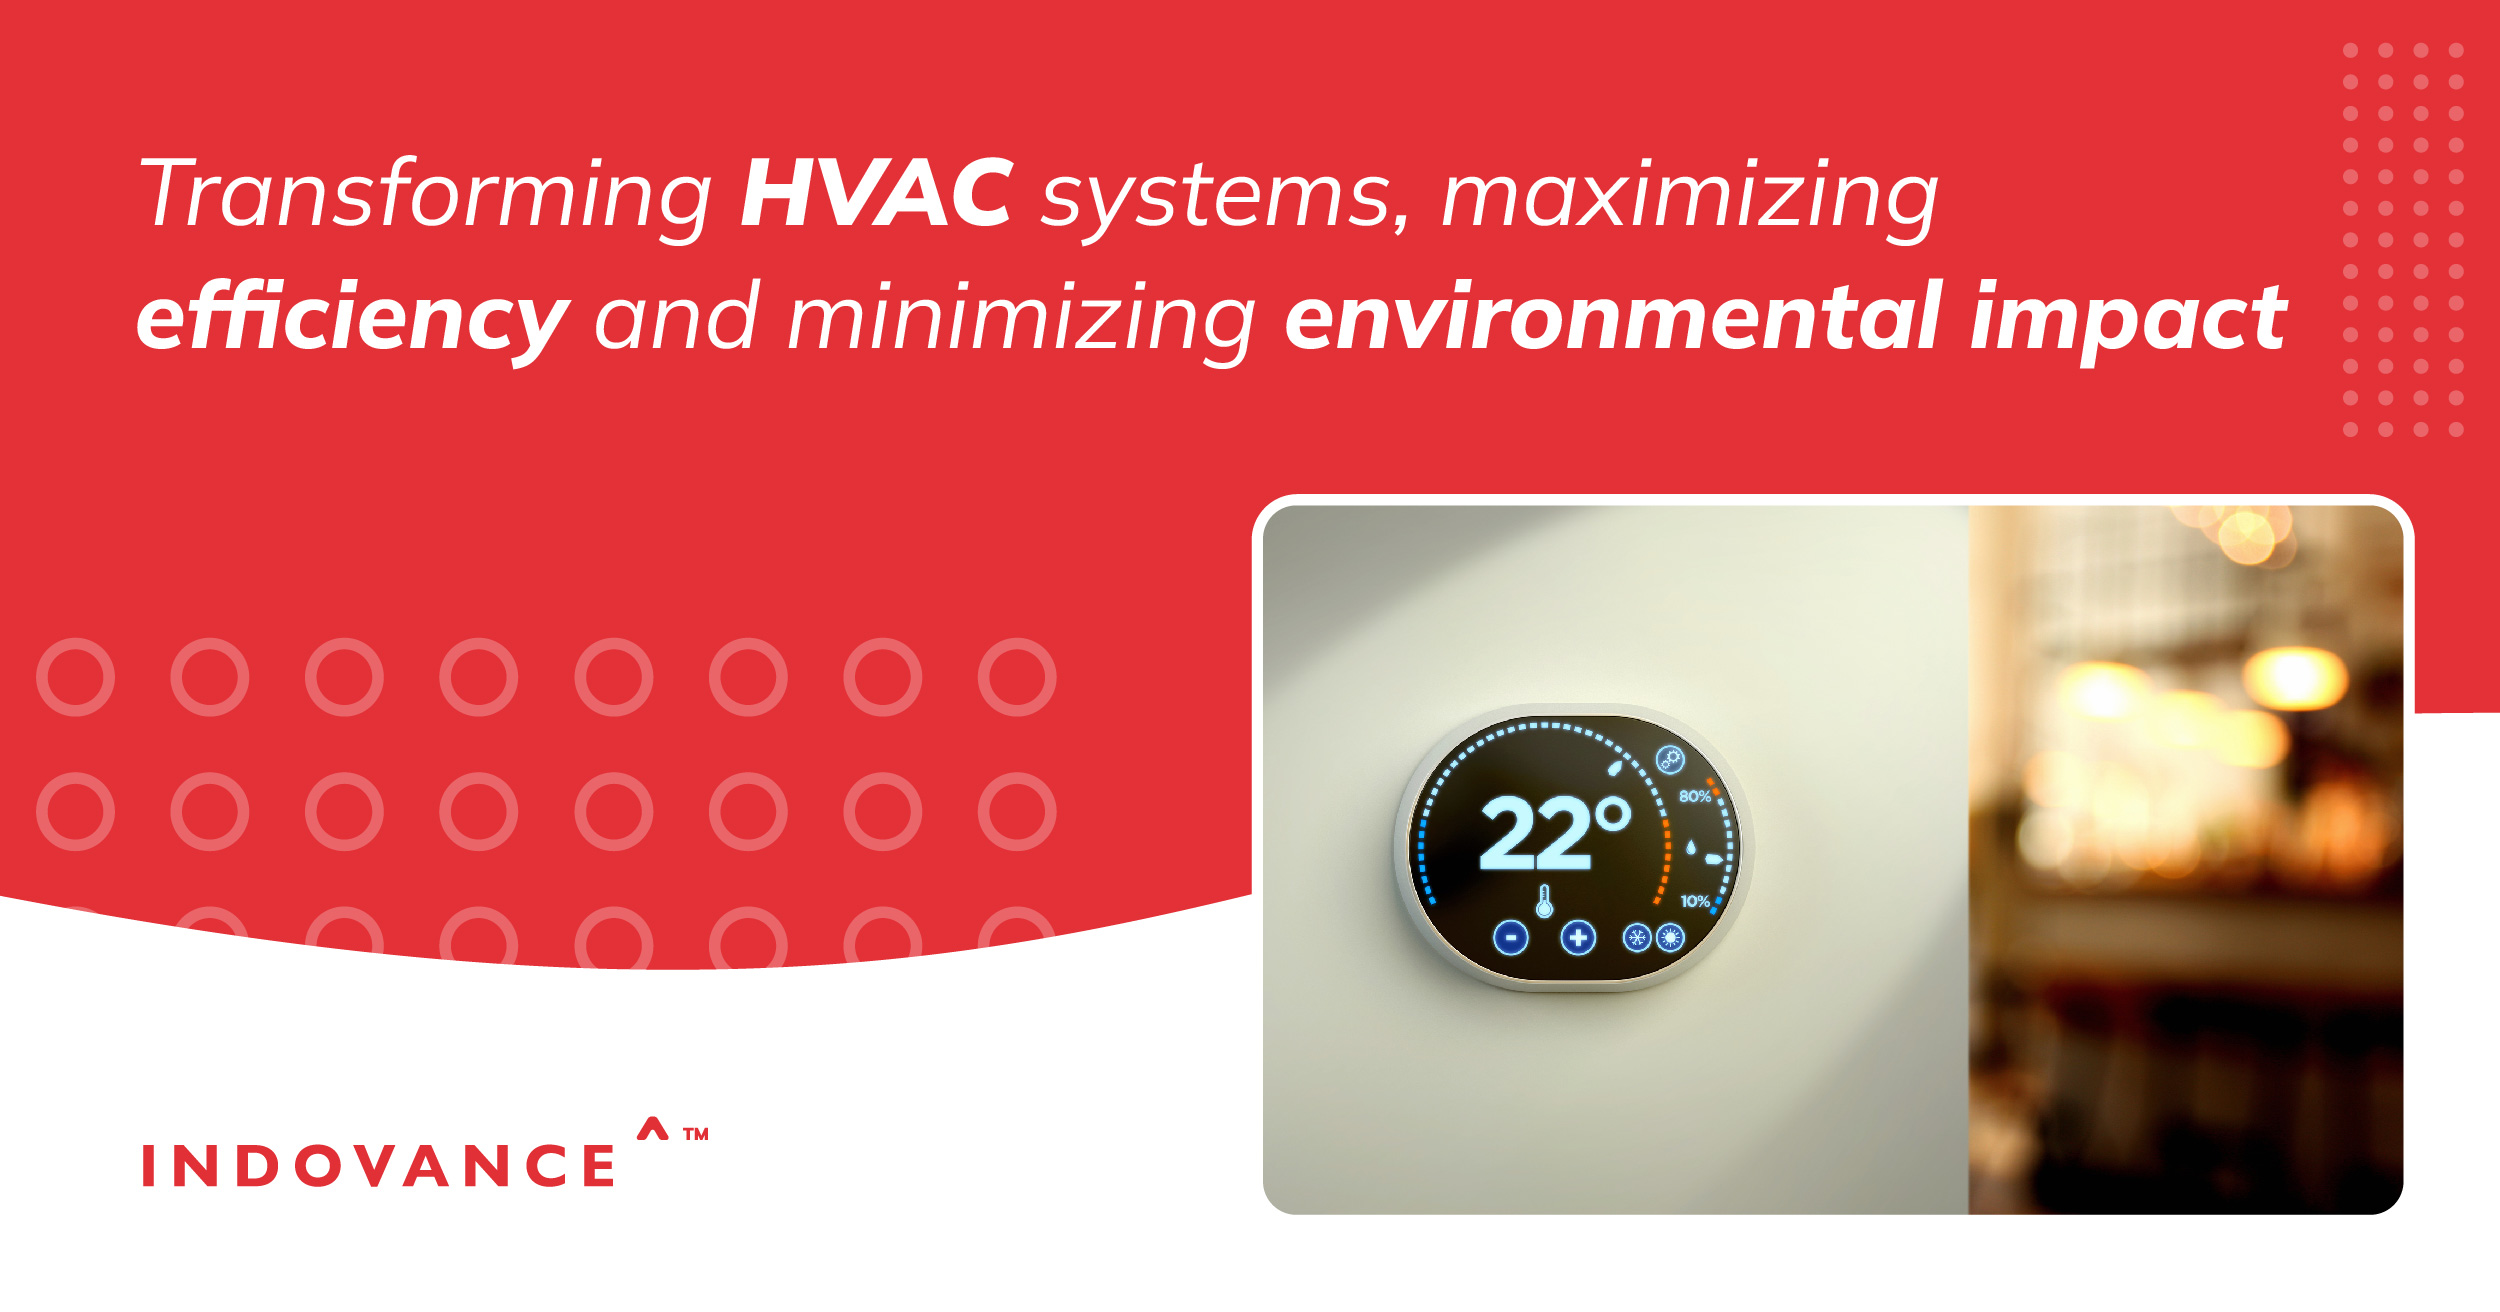 AI in HVAC systems: Bringing sustainability in cooling?